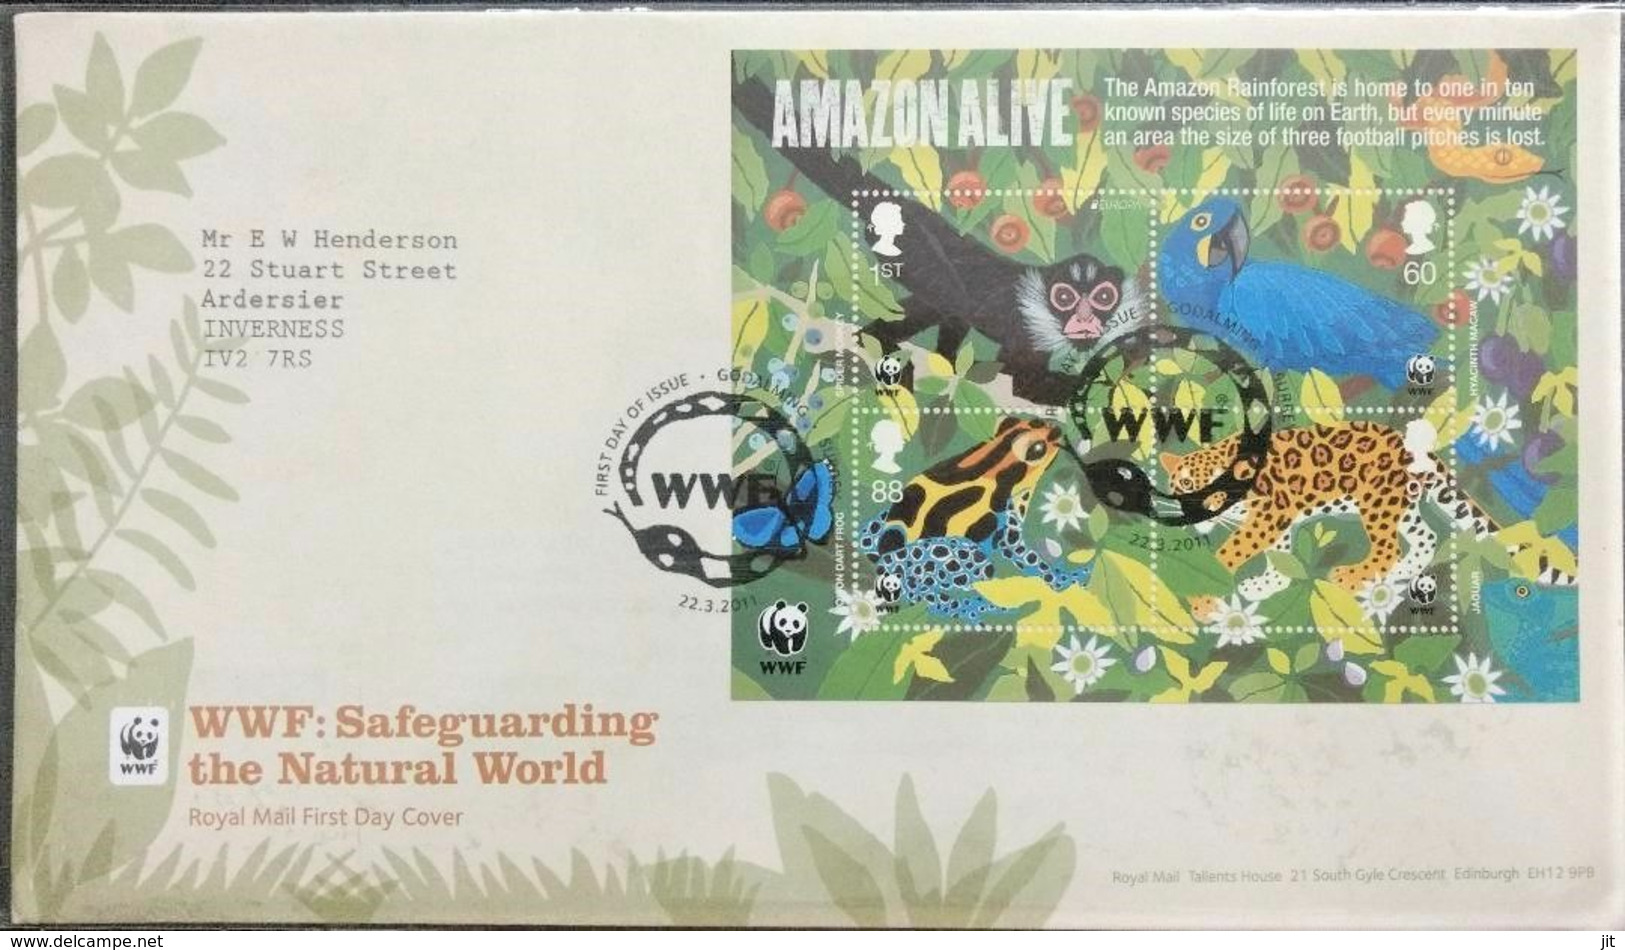 139. GREAT BRITAIN 2011 STAMP M/S WWF : SAFE GUARDING THE NATURAL WORLD, AMAZON ALIVE  FDC  . - 2011-2020 Em. Décimales